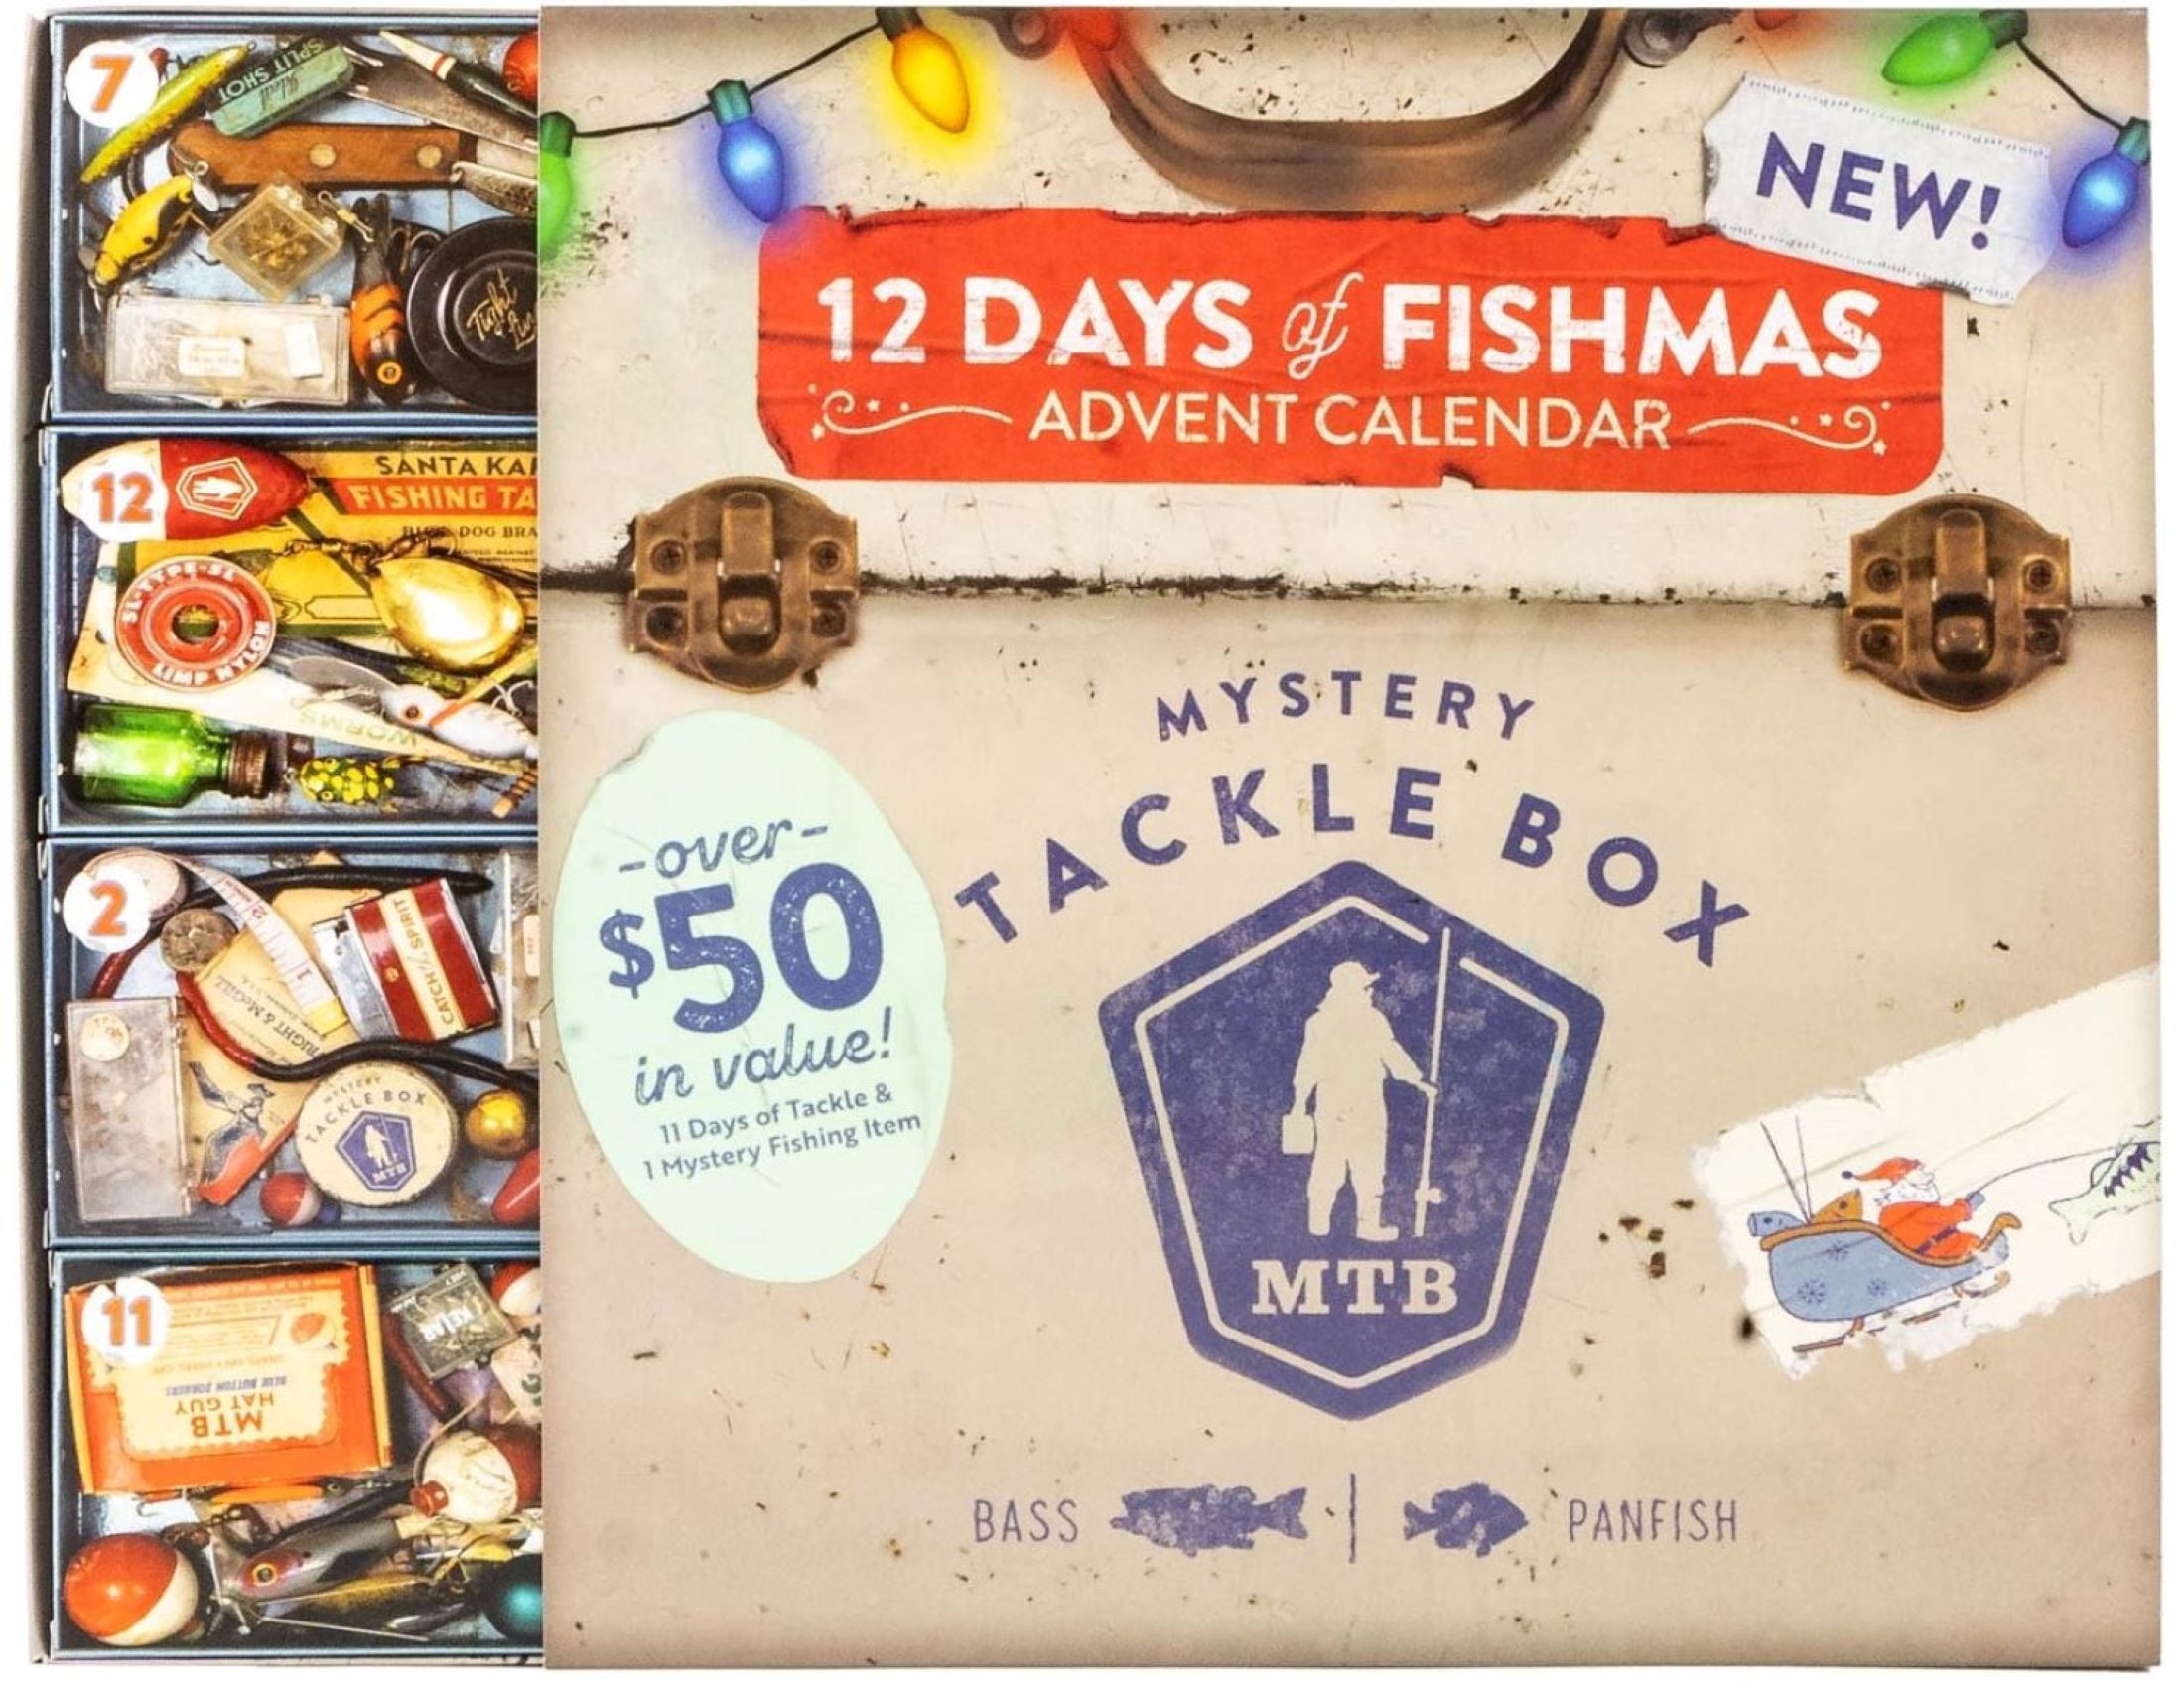 Fishing lures Mystery Tackle Box 12 Days of Fishmas Holiday Fishing Advent  810029338523